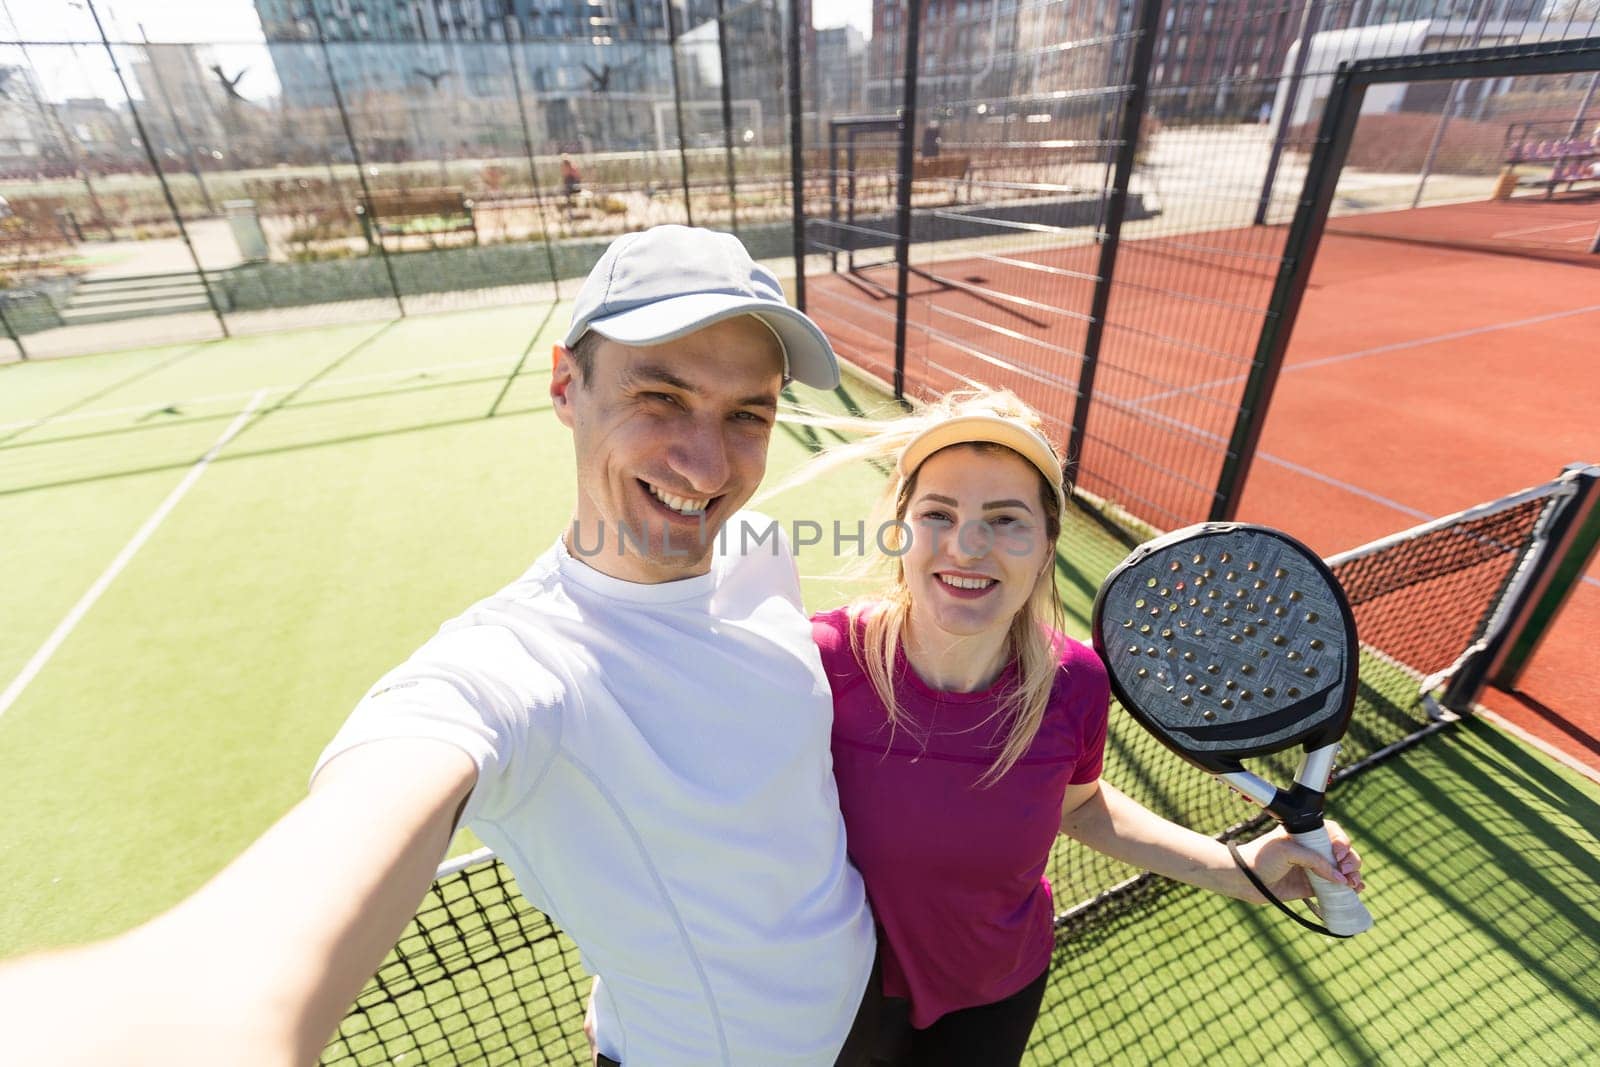 Paddle tennis woman and man team posing in wide angle image by Andelov13